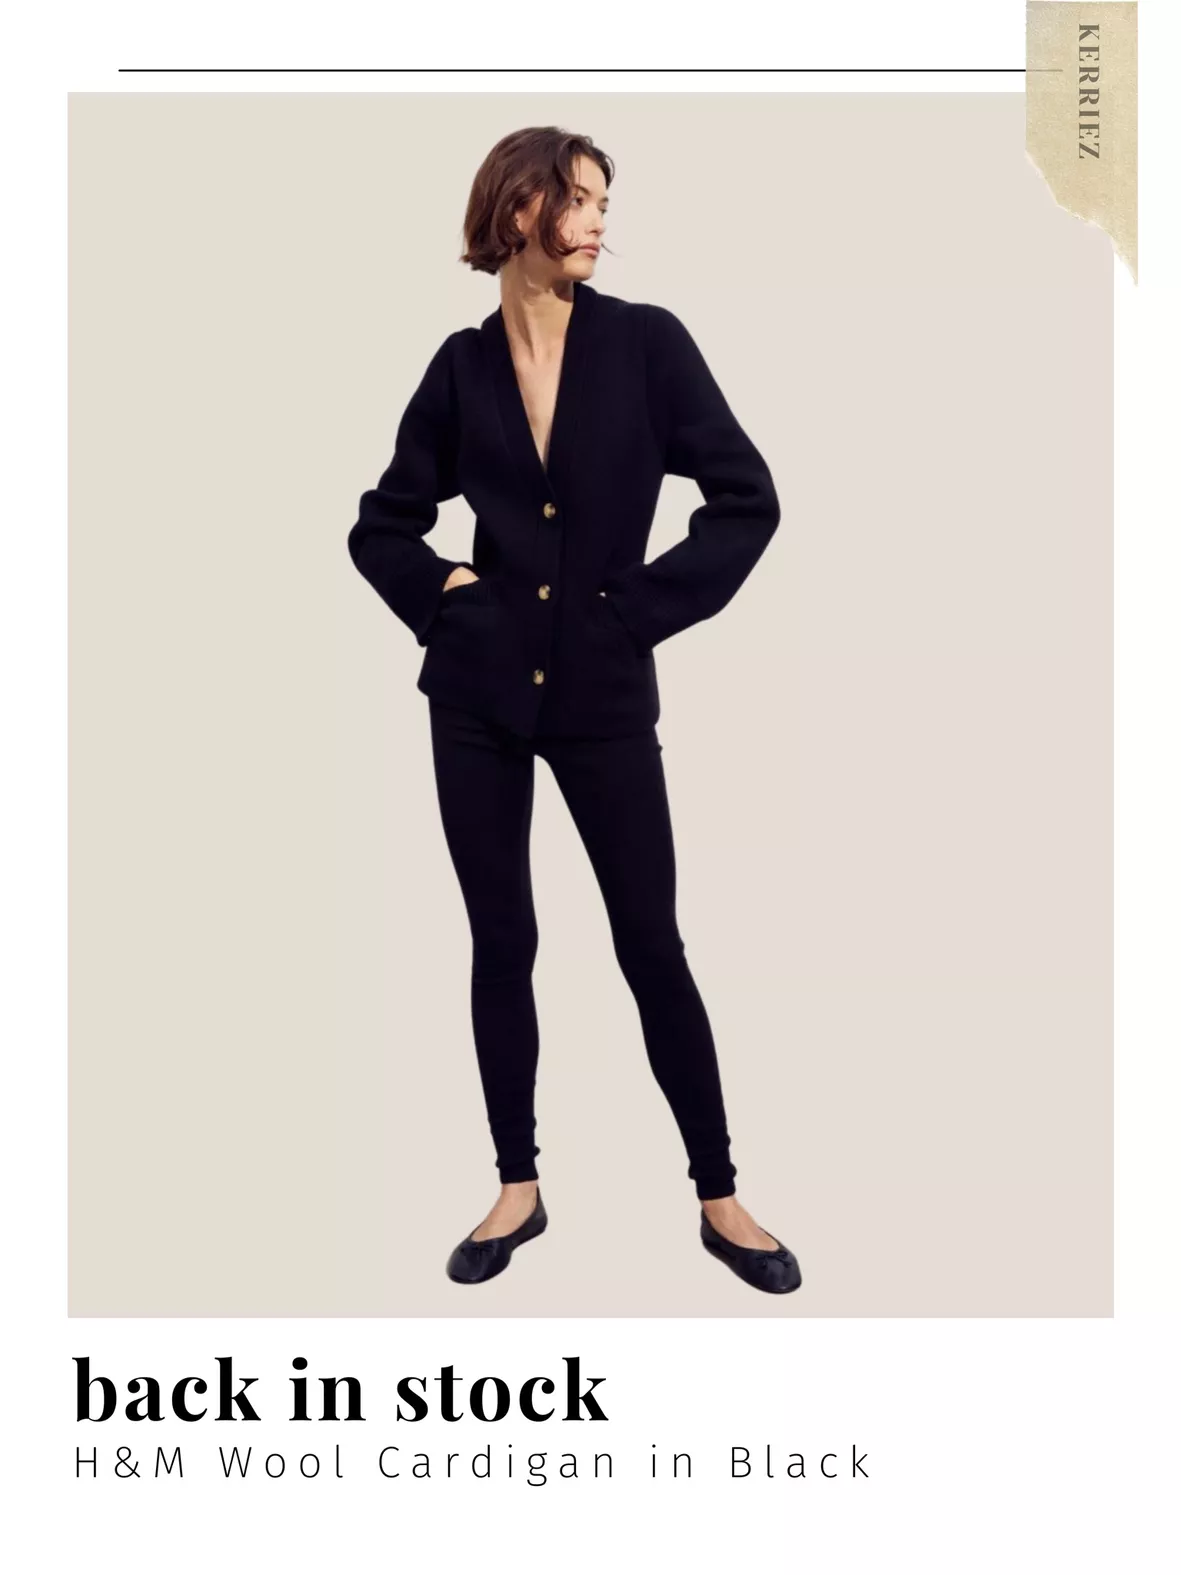 H&M's Single-Breasted Blazer Is Sure to Sell Out Again, Fast